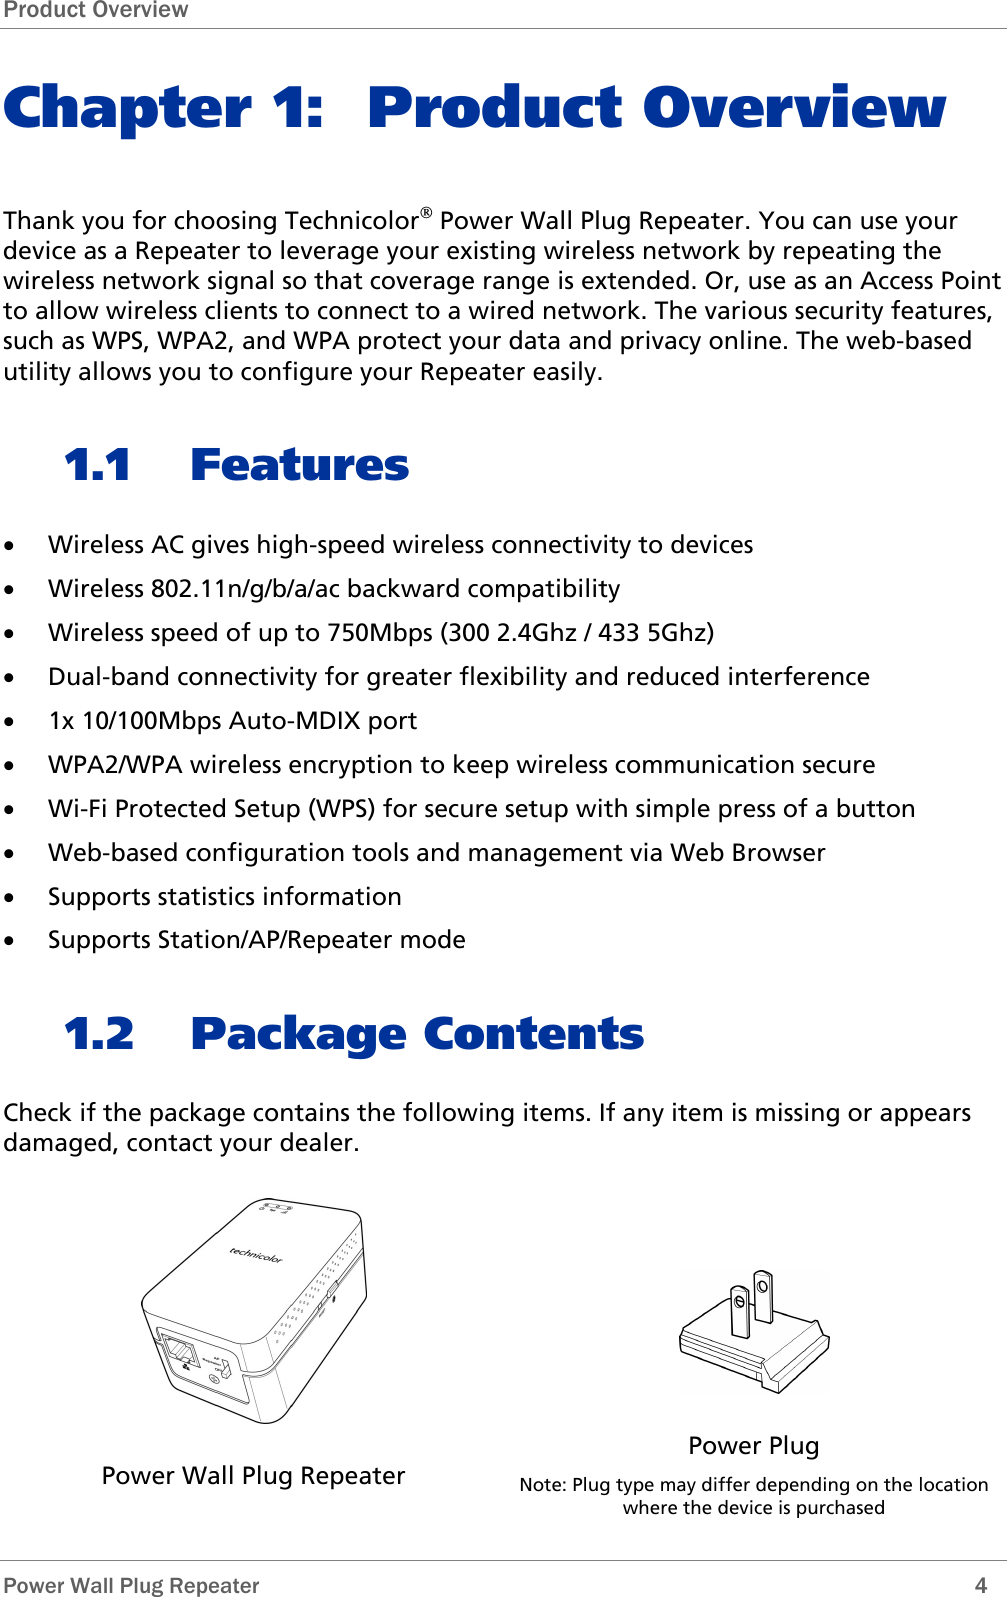 Product Overview  Power Wall Plug Repeater        4 Chapter 1: Product Overview Thank you for choosing Technicolor Power Wall Plug Repeater. You can use your device as a Repeater to leverage your existing wireless network by repeating the wireless network signal so that coverage range is extended. Or, use as an Access Point to allow wireless clients to connect to a wired network. The various security features, such as WPS, WPA2, and WPA protect your data and privacy online. The web-based utility allows you to configure your Repeater easily. 1.1 Features • Wireless AC gives high-speed wireless connectivity to devices • Wireless 802.11n/g/b/a/ac backward compatibility  • Wireless speed of up to 750Mbps (300 2.4Ghz / 433 5Ghz) • Dual-band connectivity for greater flexibility and reduced interference • 1x 10/100Mbps Auto-MDIX port • WPA2/WPA wireless encryption to keep wireless communication secure • Wi-Fi Protected Setup (WPS) for secure setup with simple press of a button • Web-based configuration tools and management via Web Browser • Supports statistics information • Supports Station/AP/Repeater mode 1.2 Package Contents Check if the package contains the following items. If any item is missing or appears damaged, contact your dealer.  Power Wall Plug Repeater  Power Plug Note: Plug type may differ depending on the location where the device is purchased 